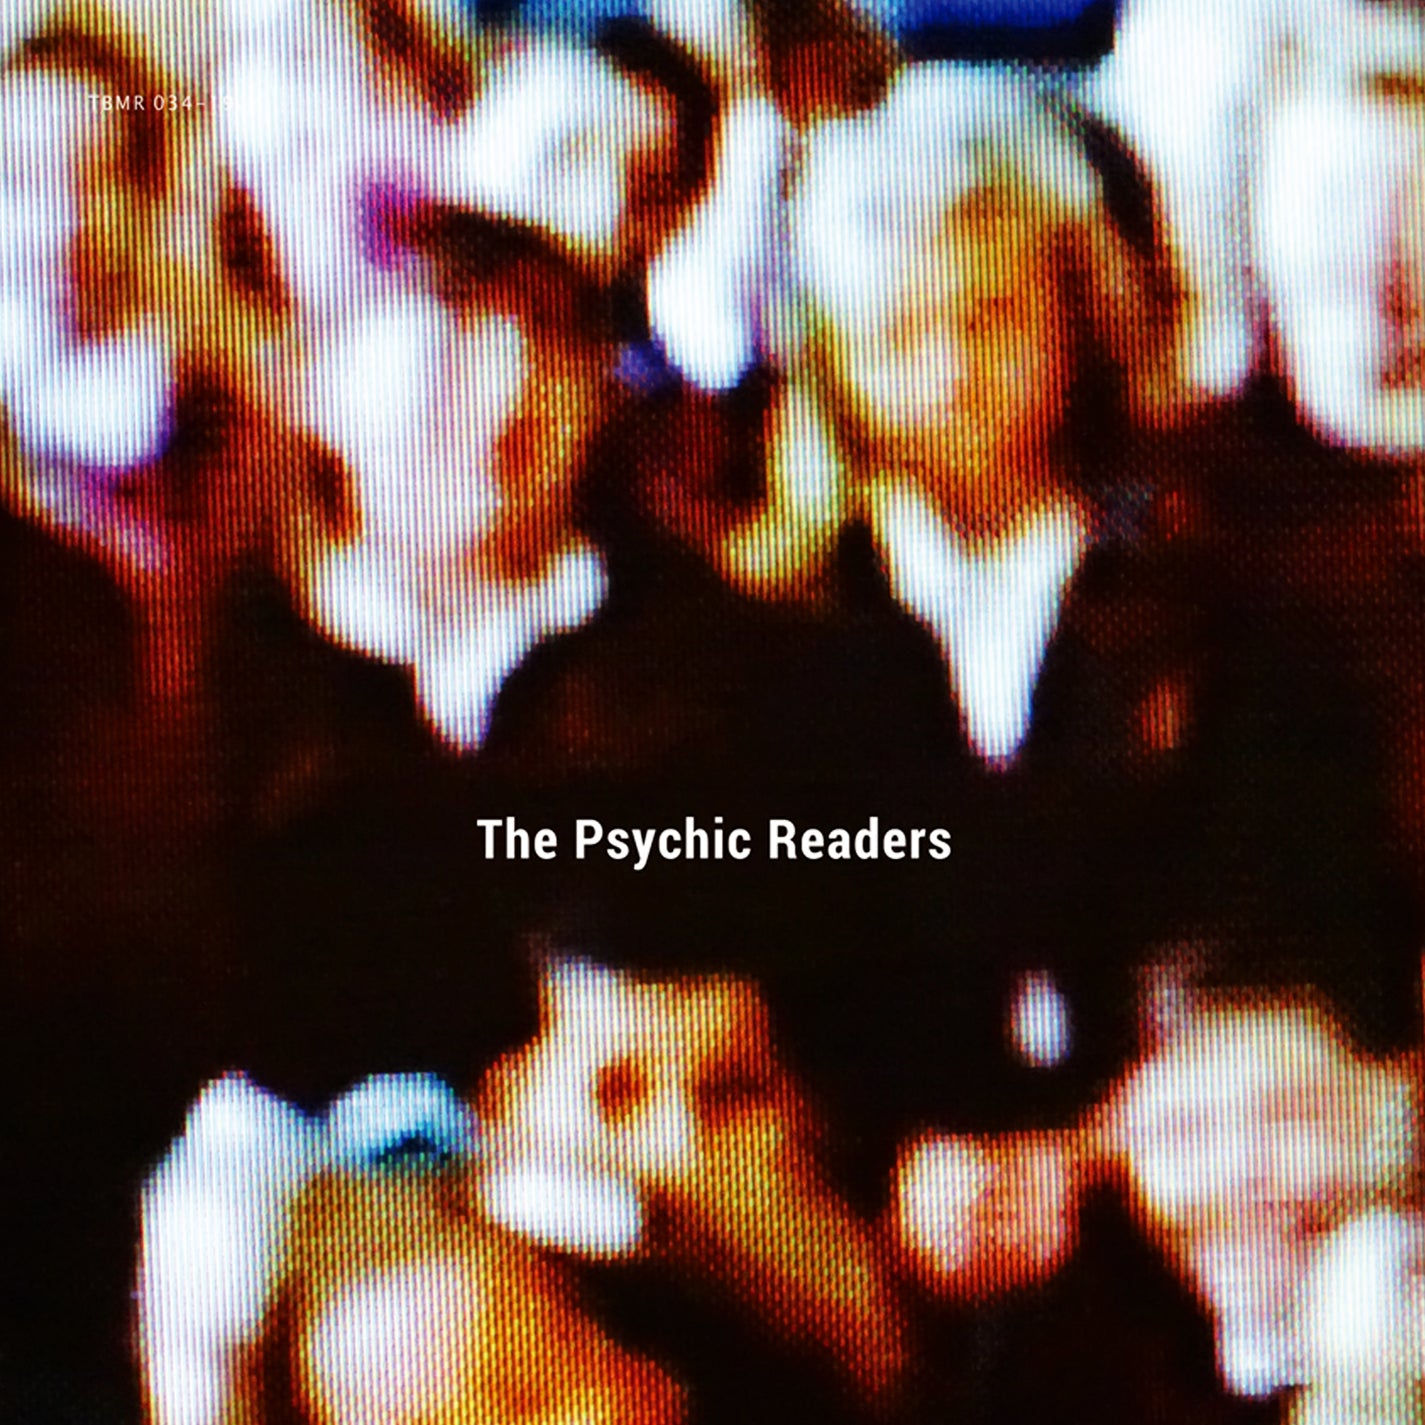 The Psychic Readers: ST Debut Album Thinkbabymusic Collective